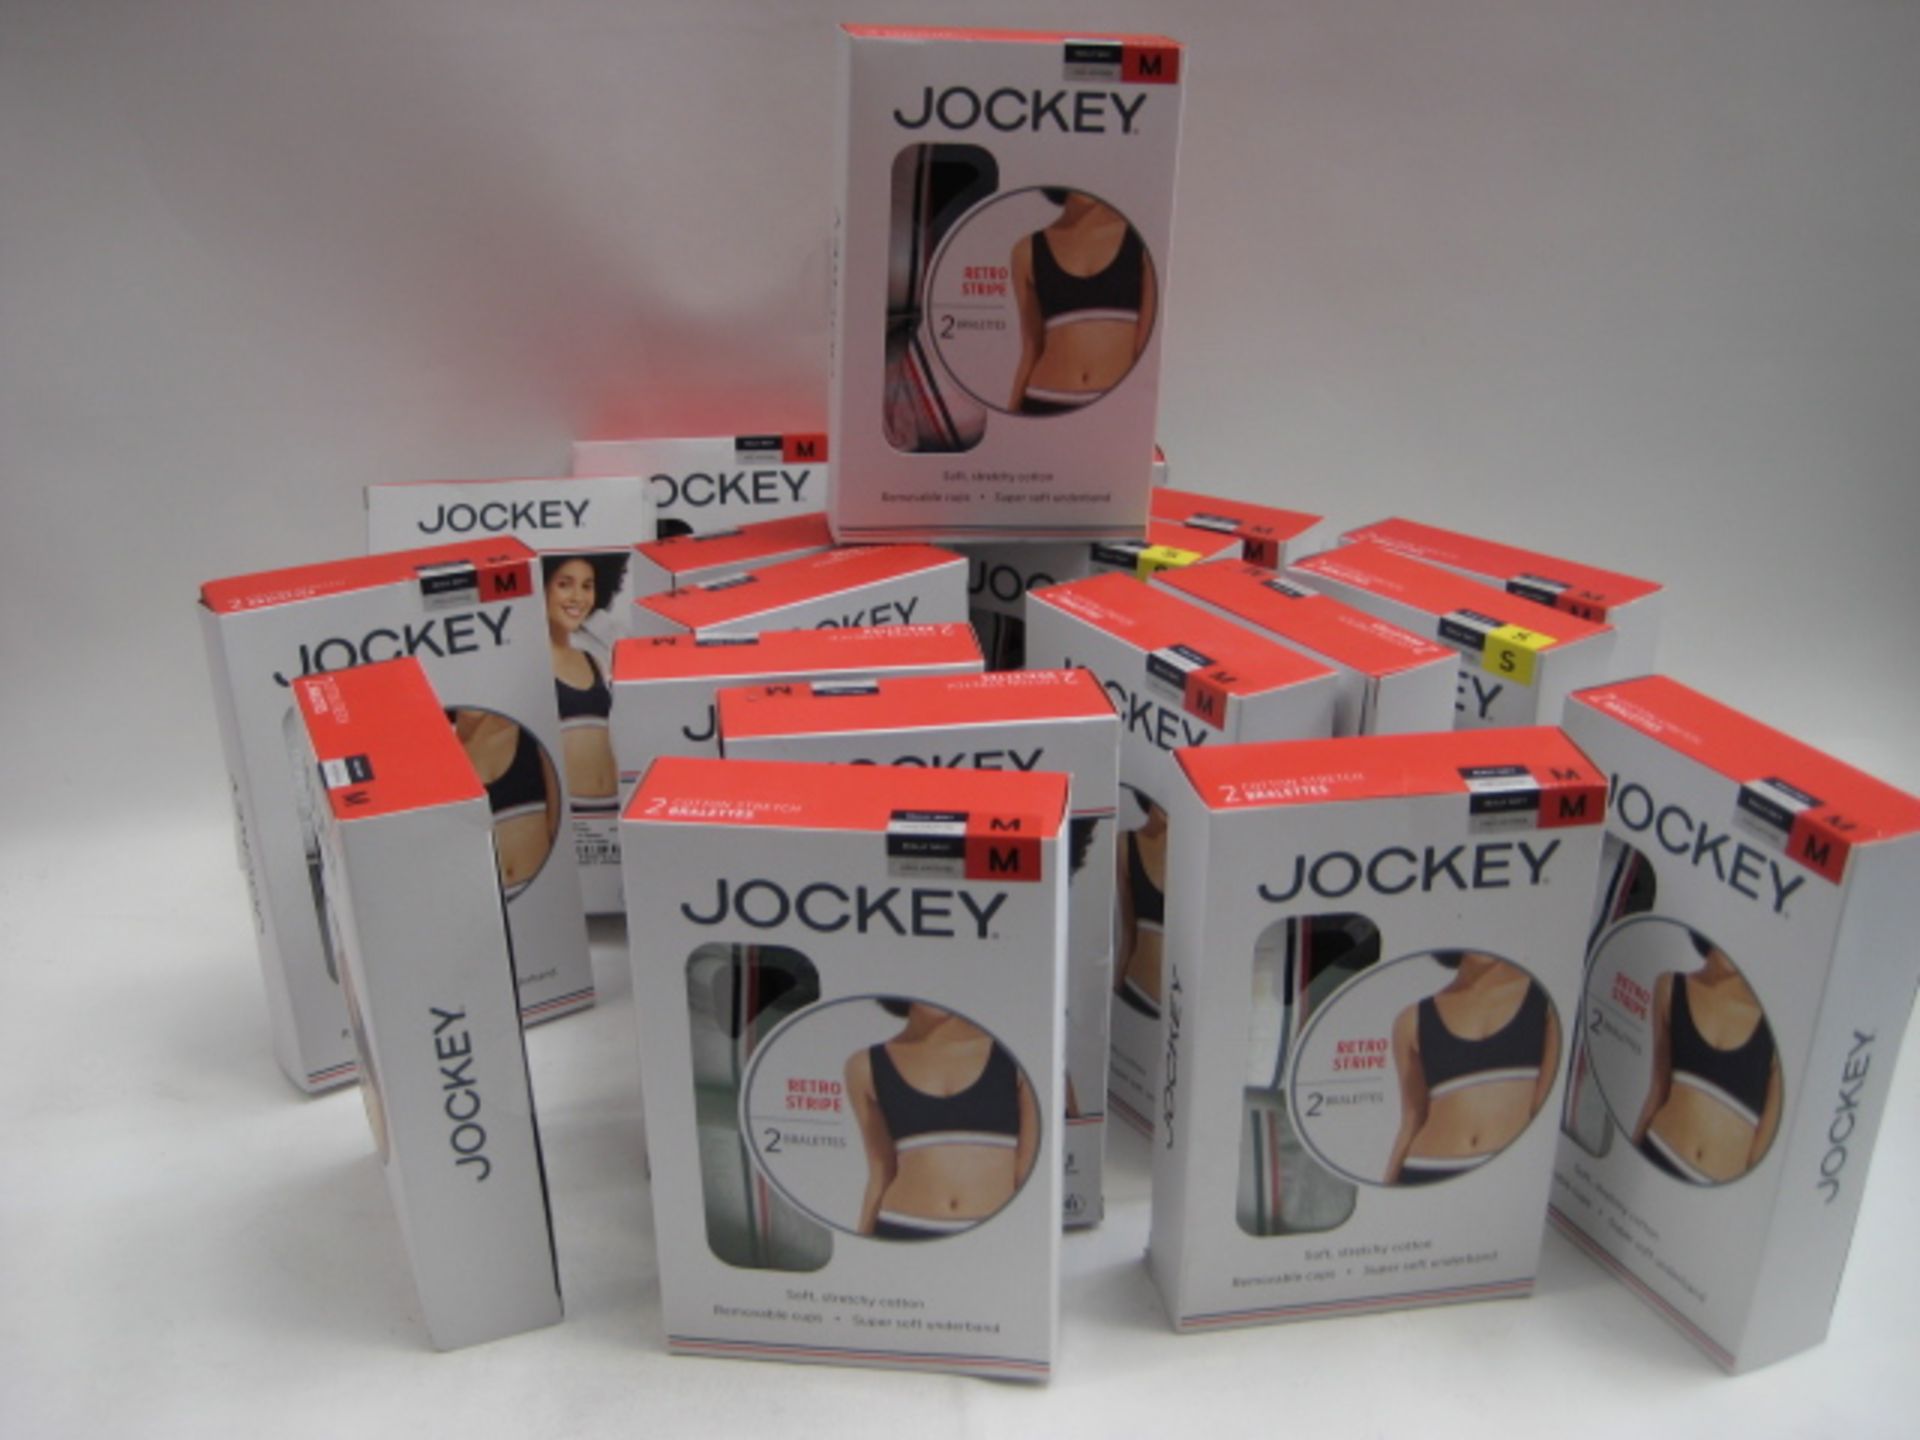 Bag containing approx 18 boxed jockey cotton stretch bralette (2 per box), size S-M